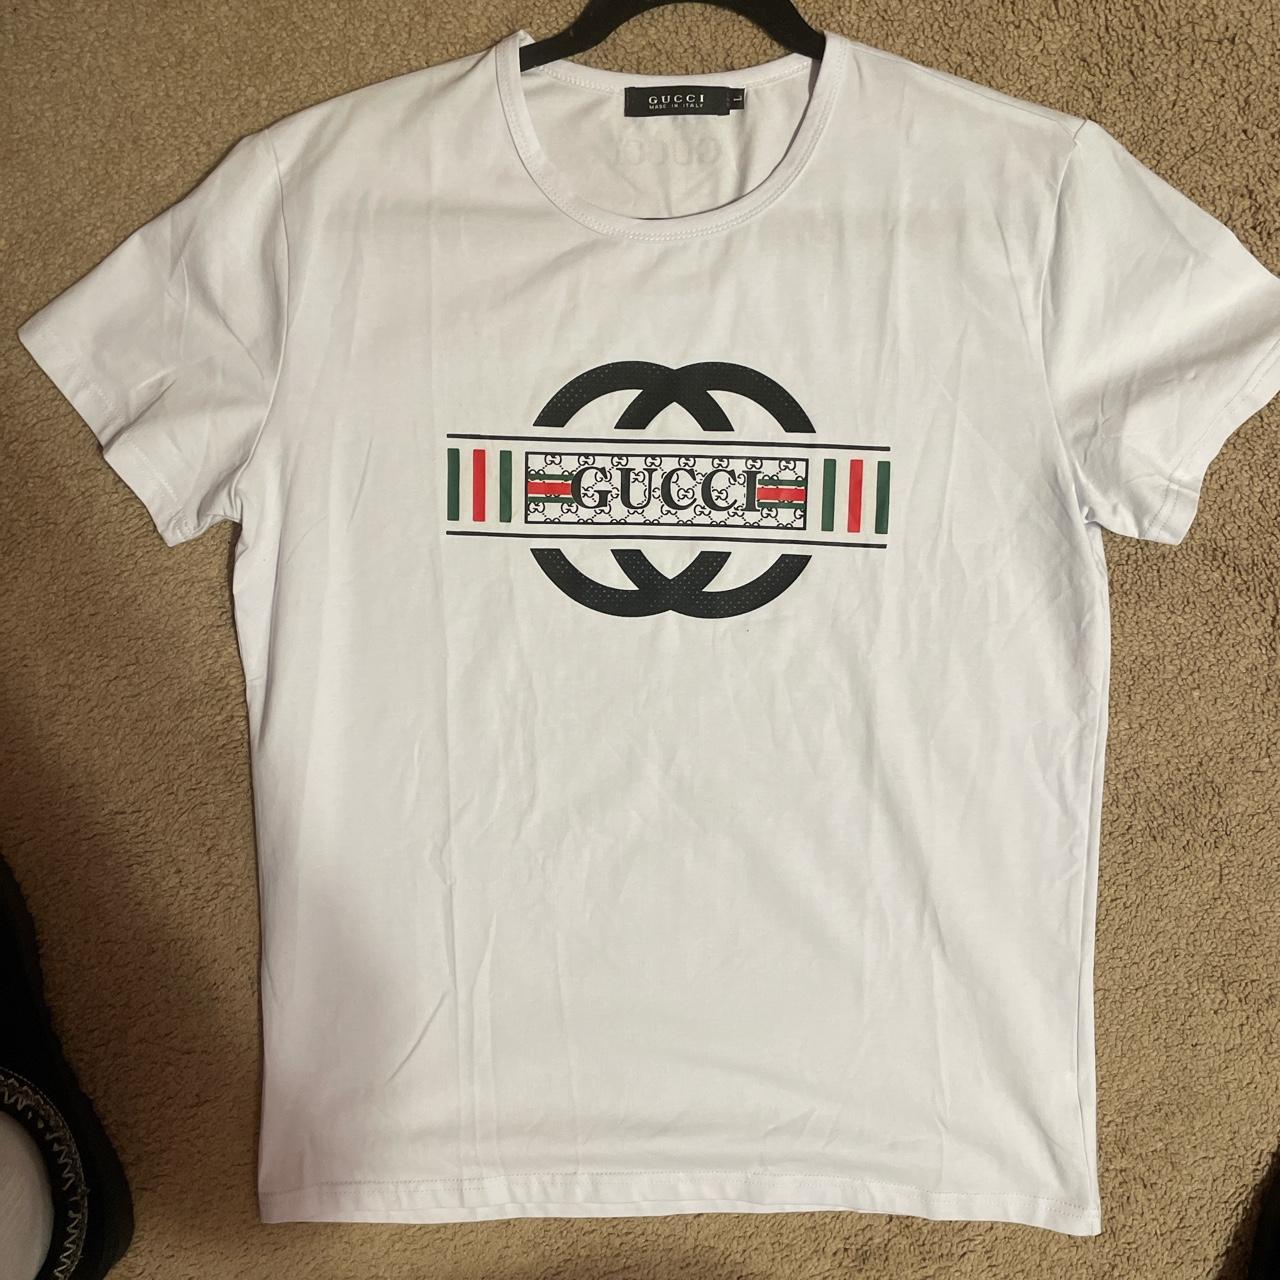 Gucci Men's White and Red T-shirt